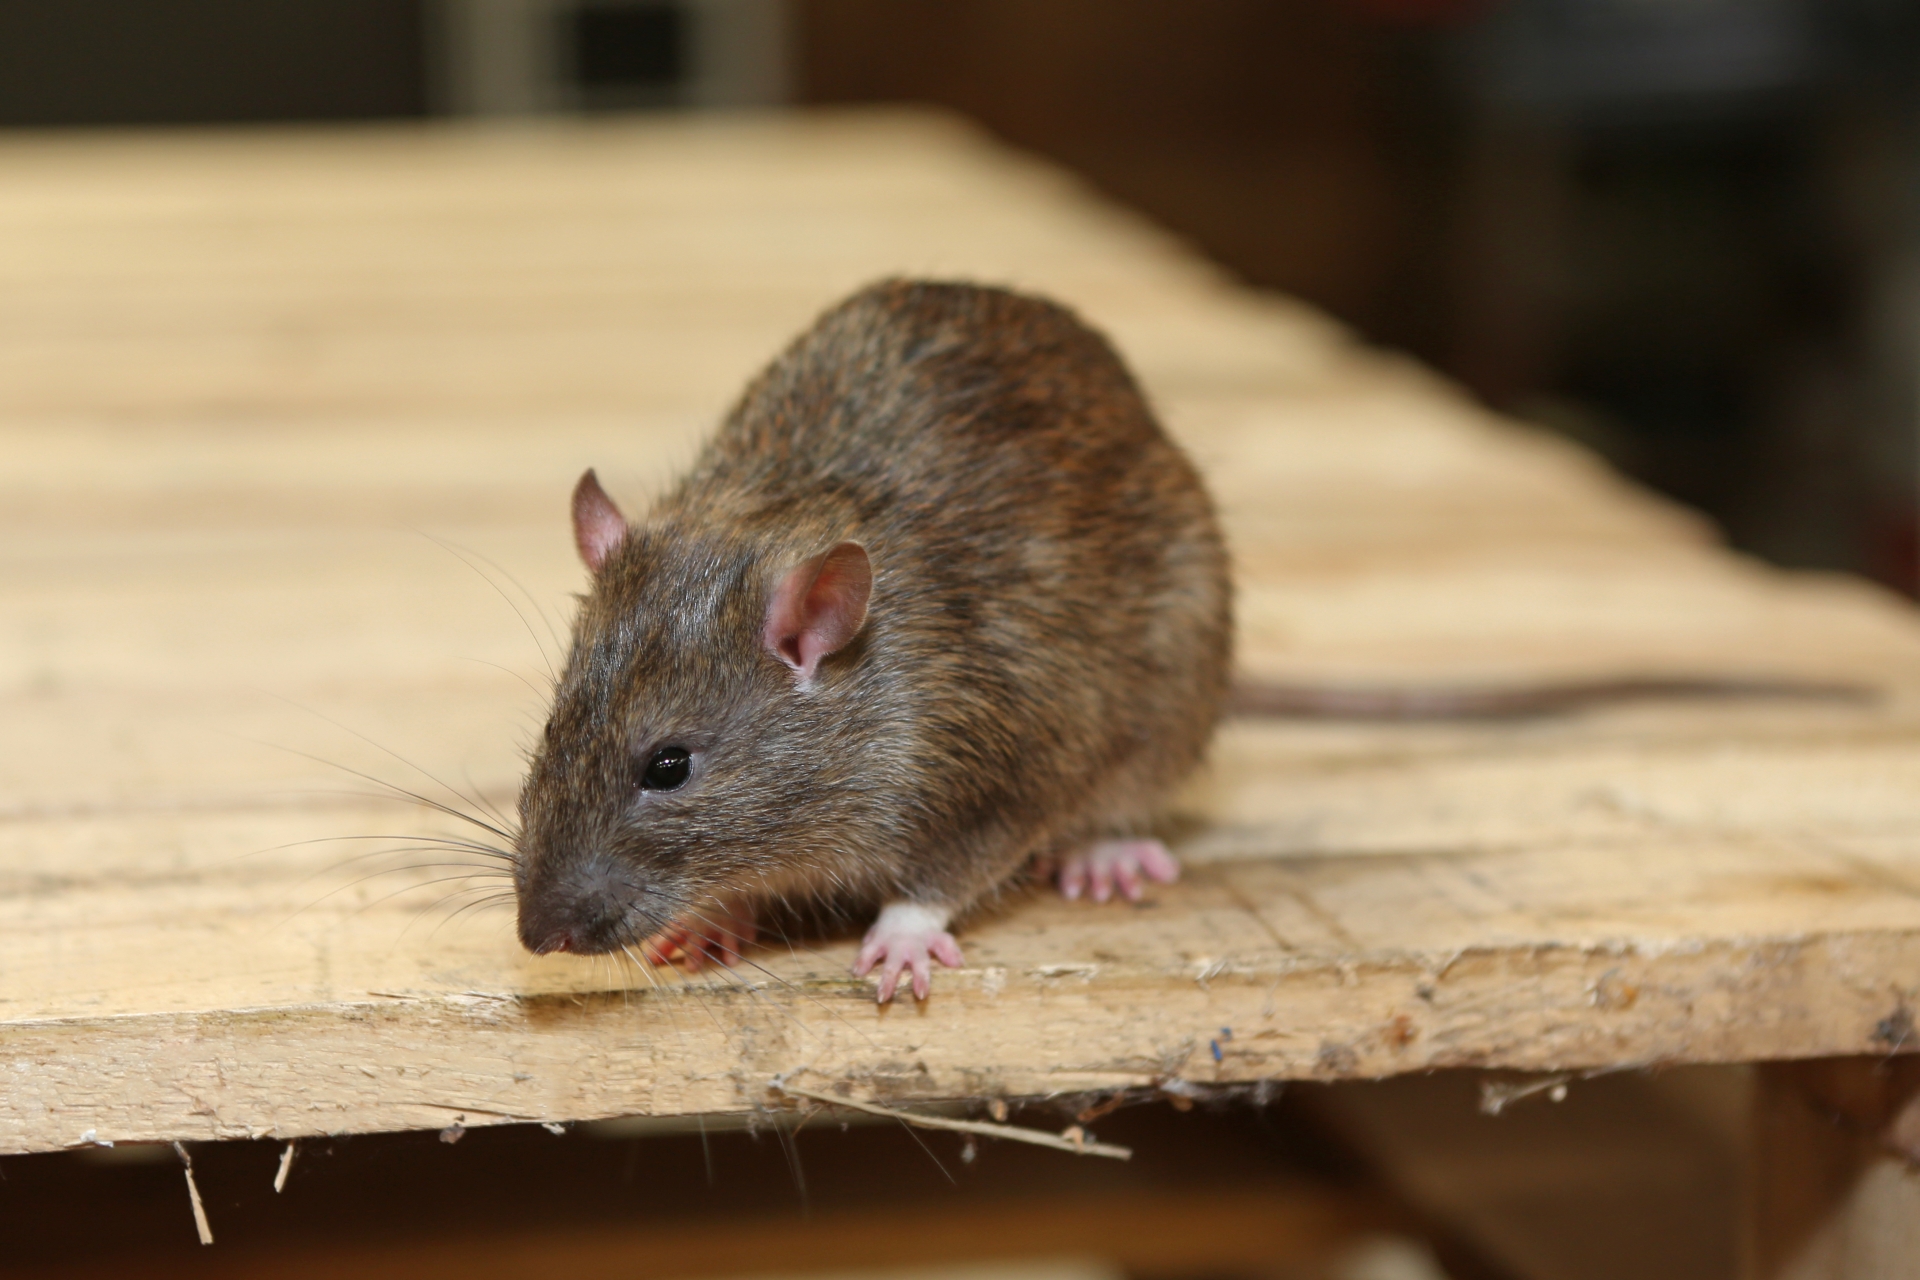 Rat Control, Pest Control in Winchmore Hill, N21. Call Now 020 8166 9746